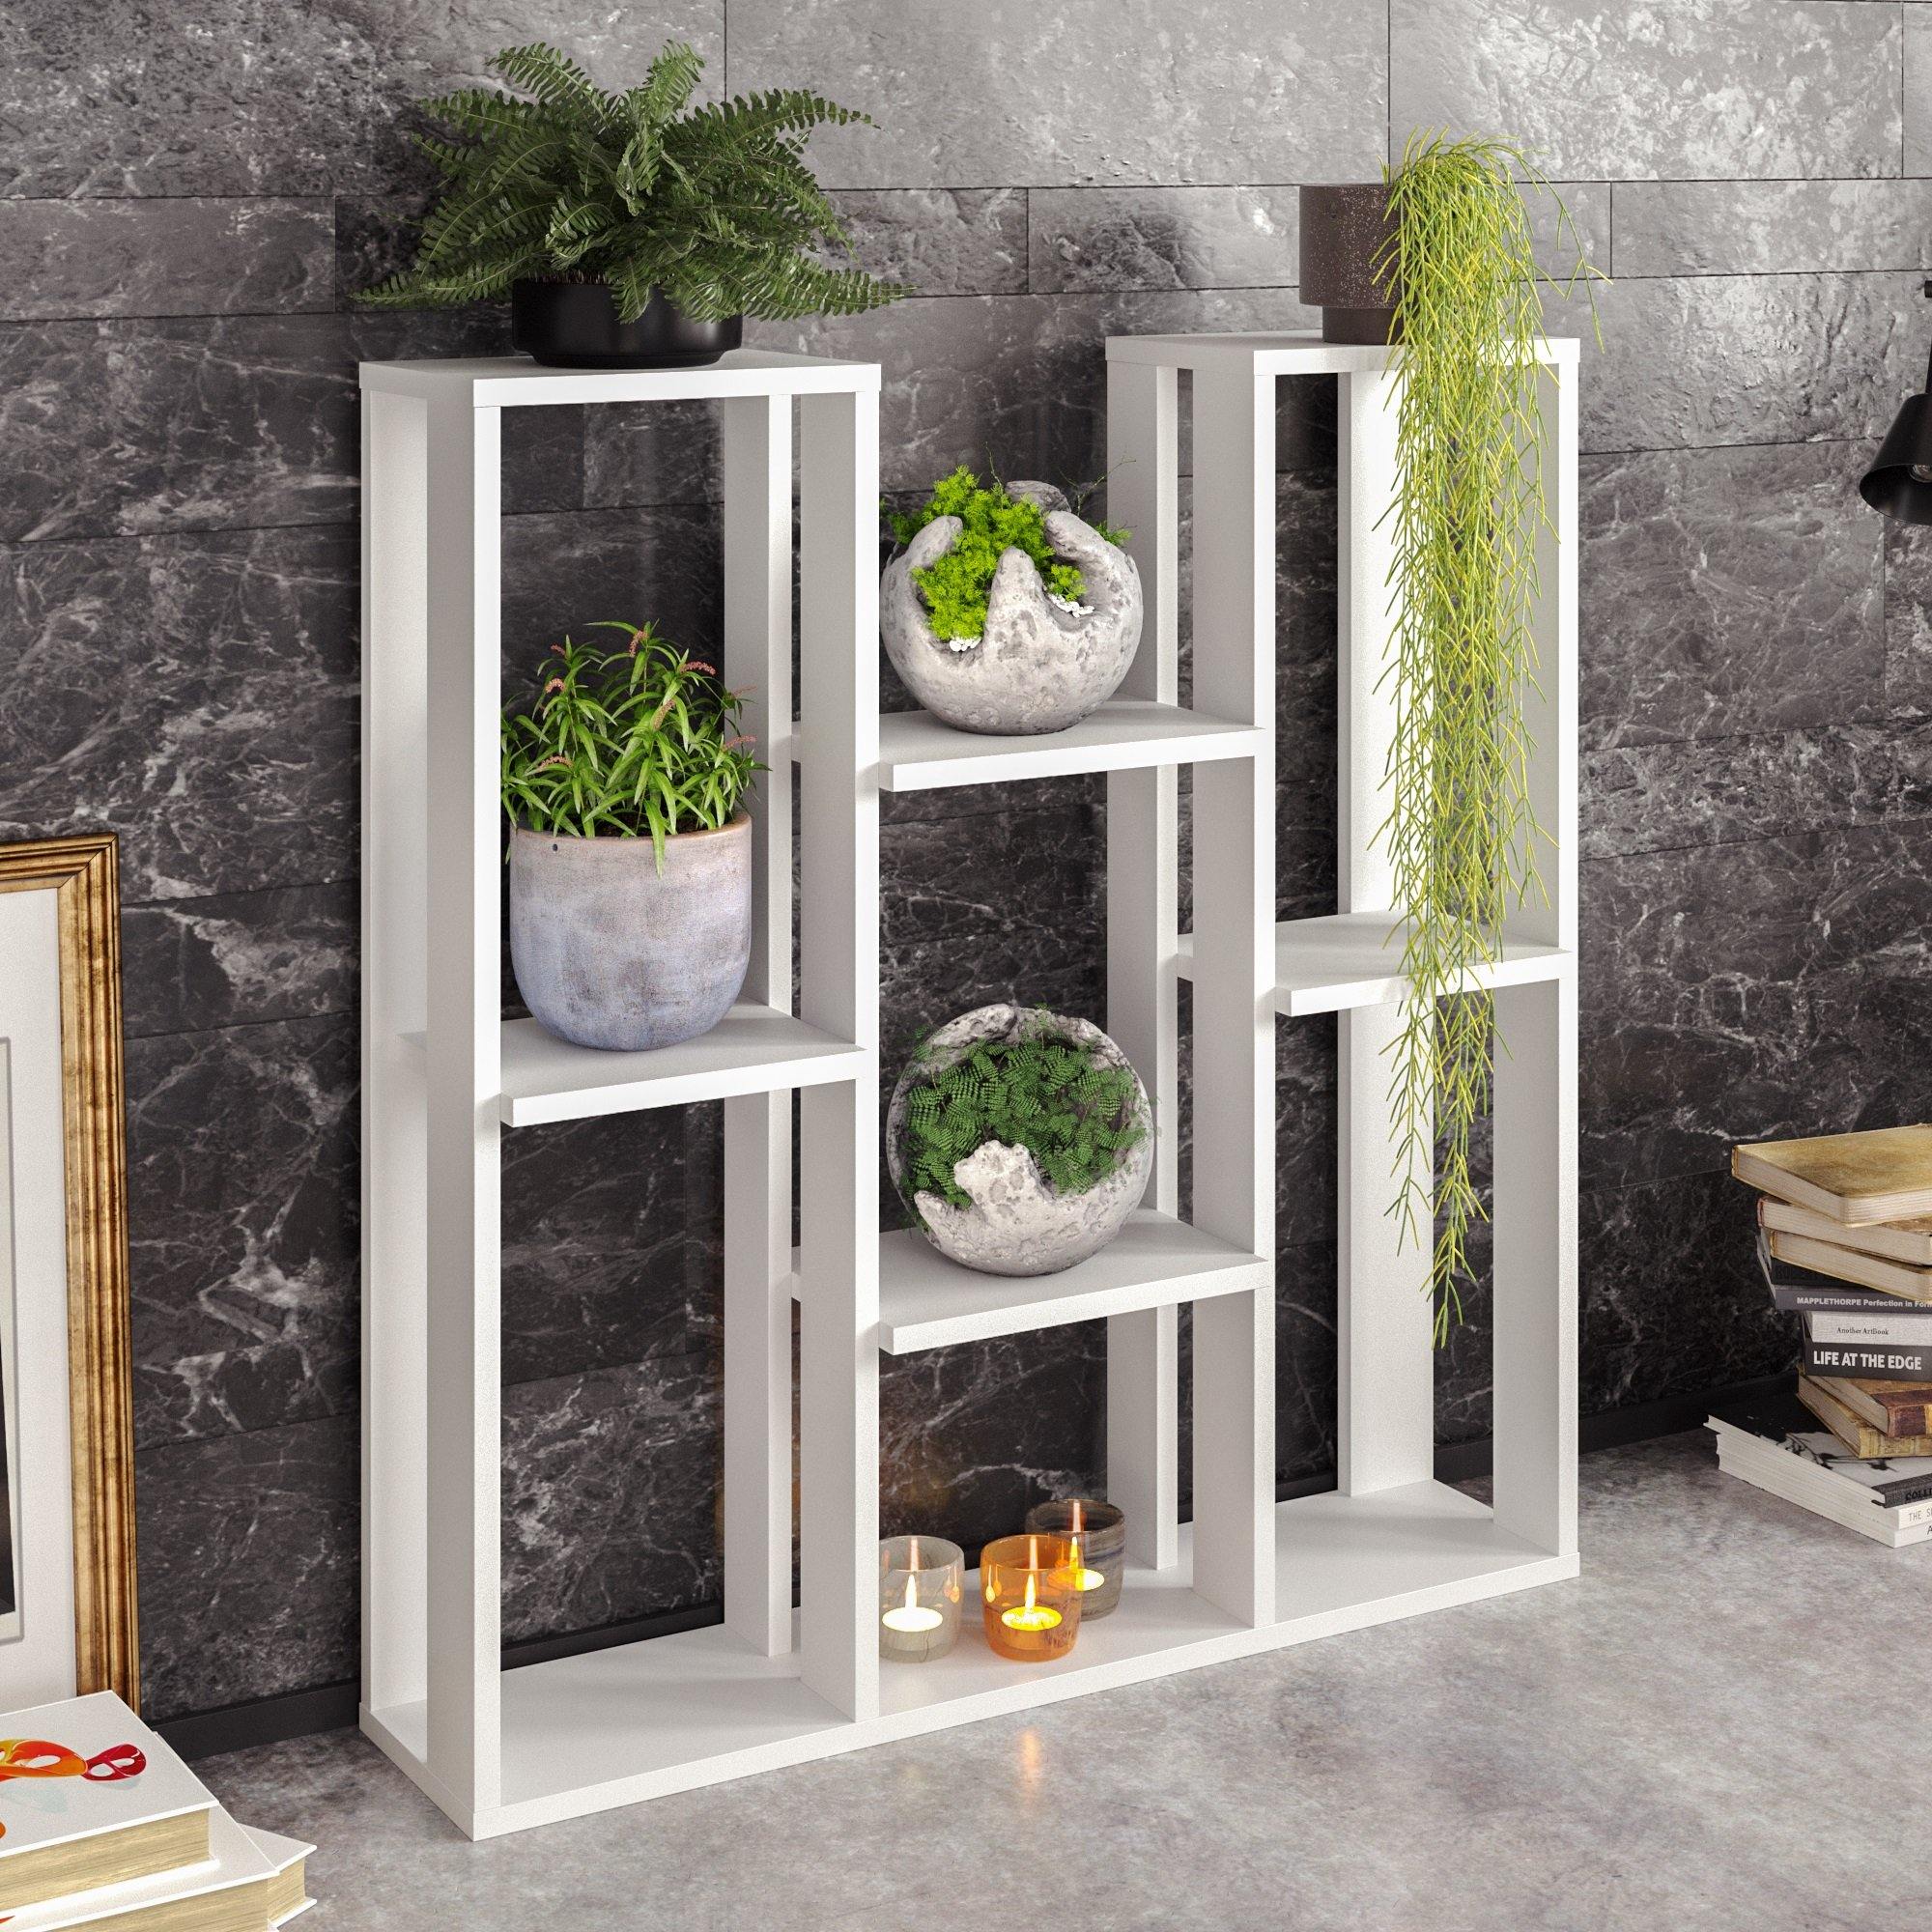 Nevada Multi-Tiered Plant Stand That Accommodates up to Nine Potted Plants/Flowers - Decorotika